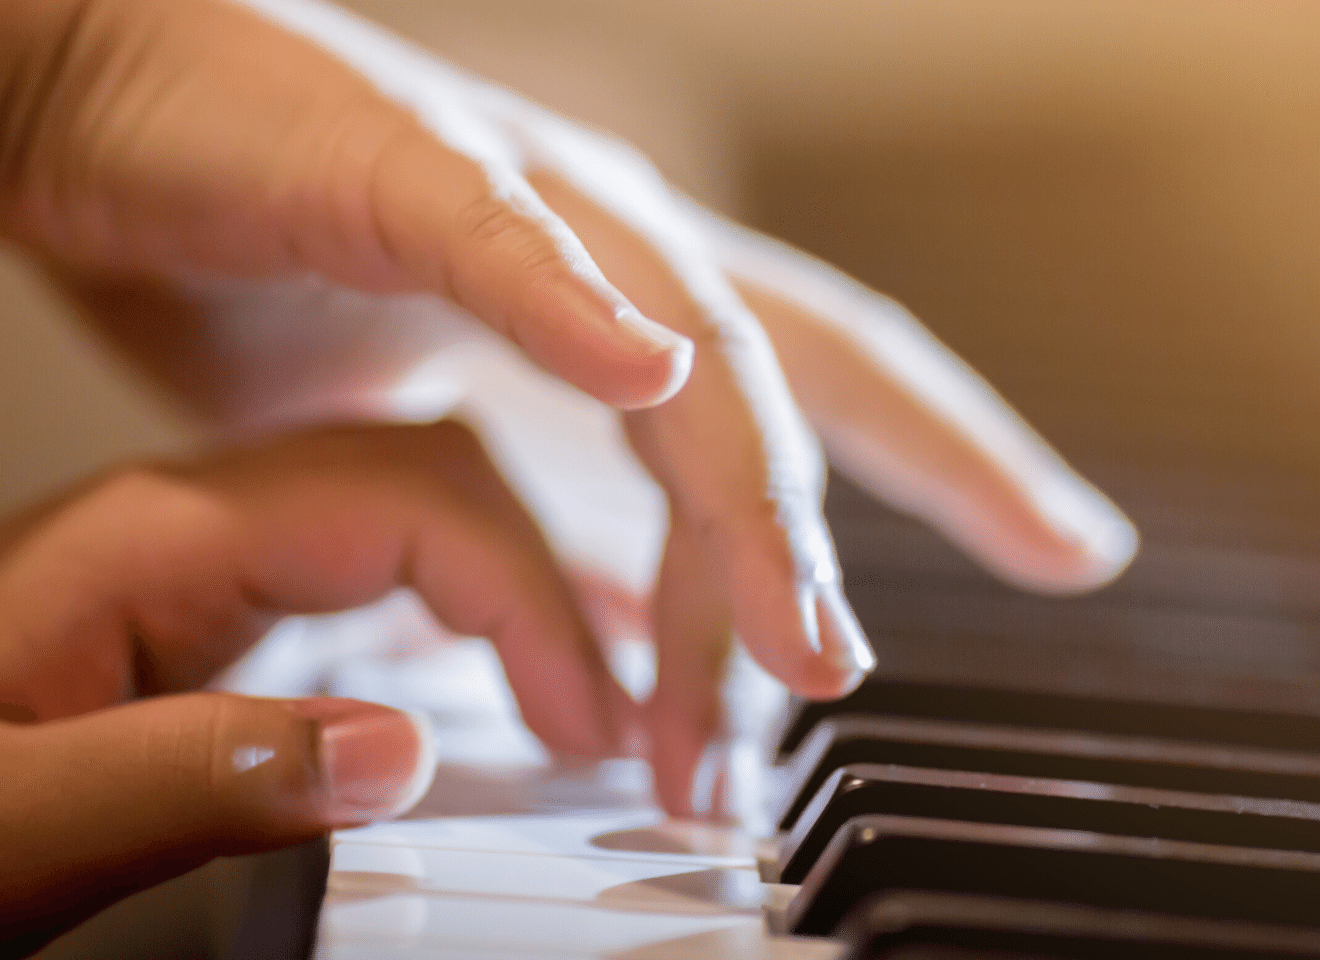 15 Most Common Piano Injuries & How to Avoid Them